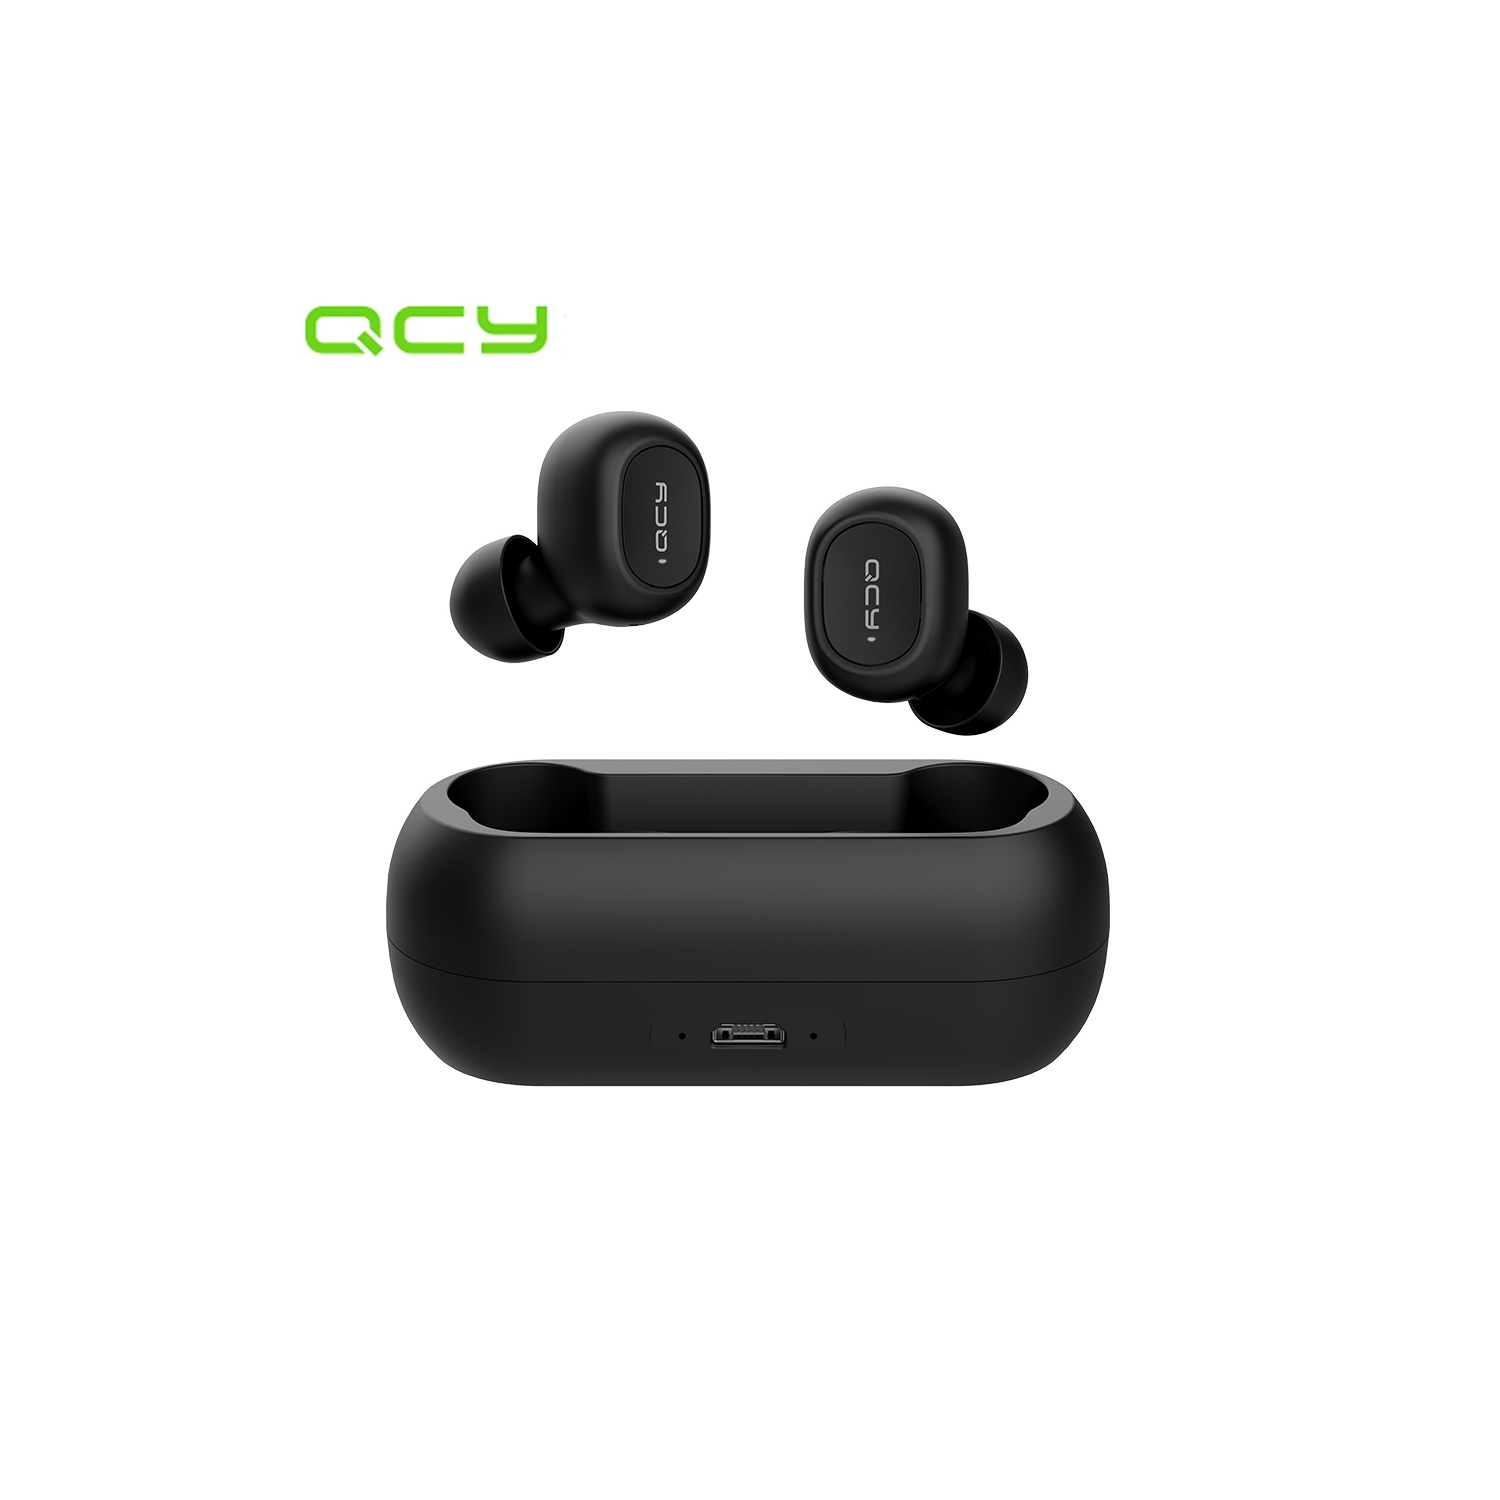 Xiaomi QCY T1C Youth Version Mini Dual V5.0 Wireless Earphones BT Earphones 3D Stereo Sound Earbuds with Dual Microphone